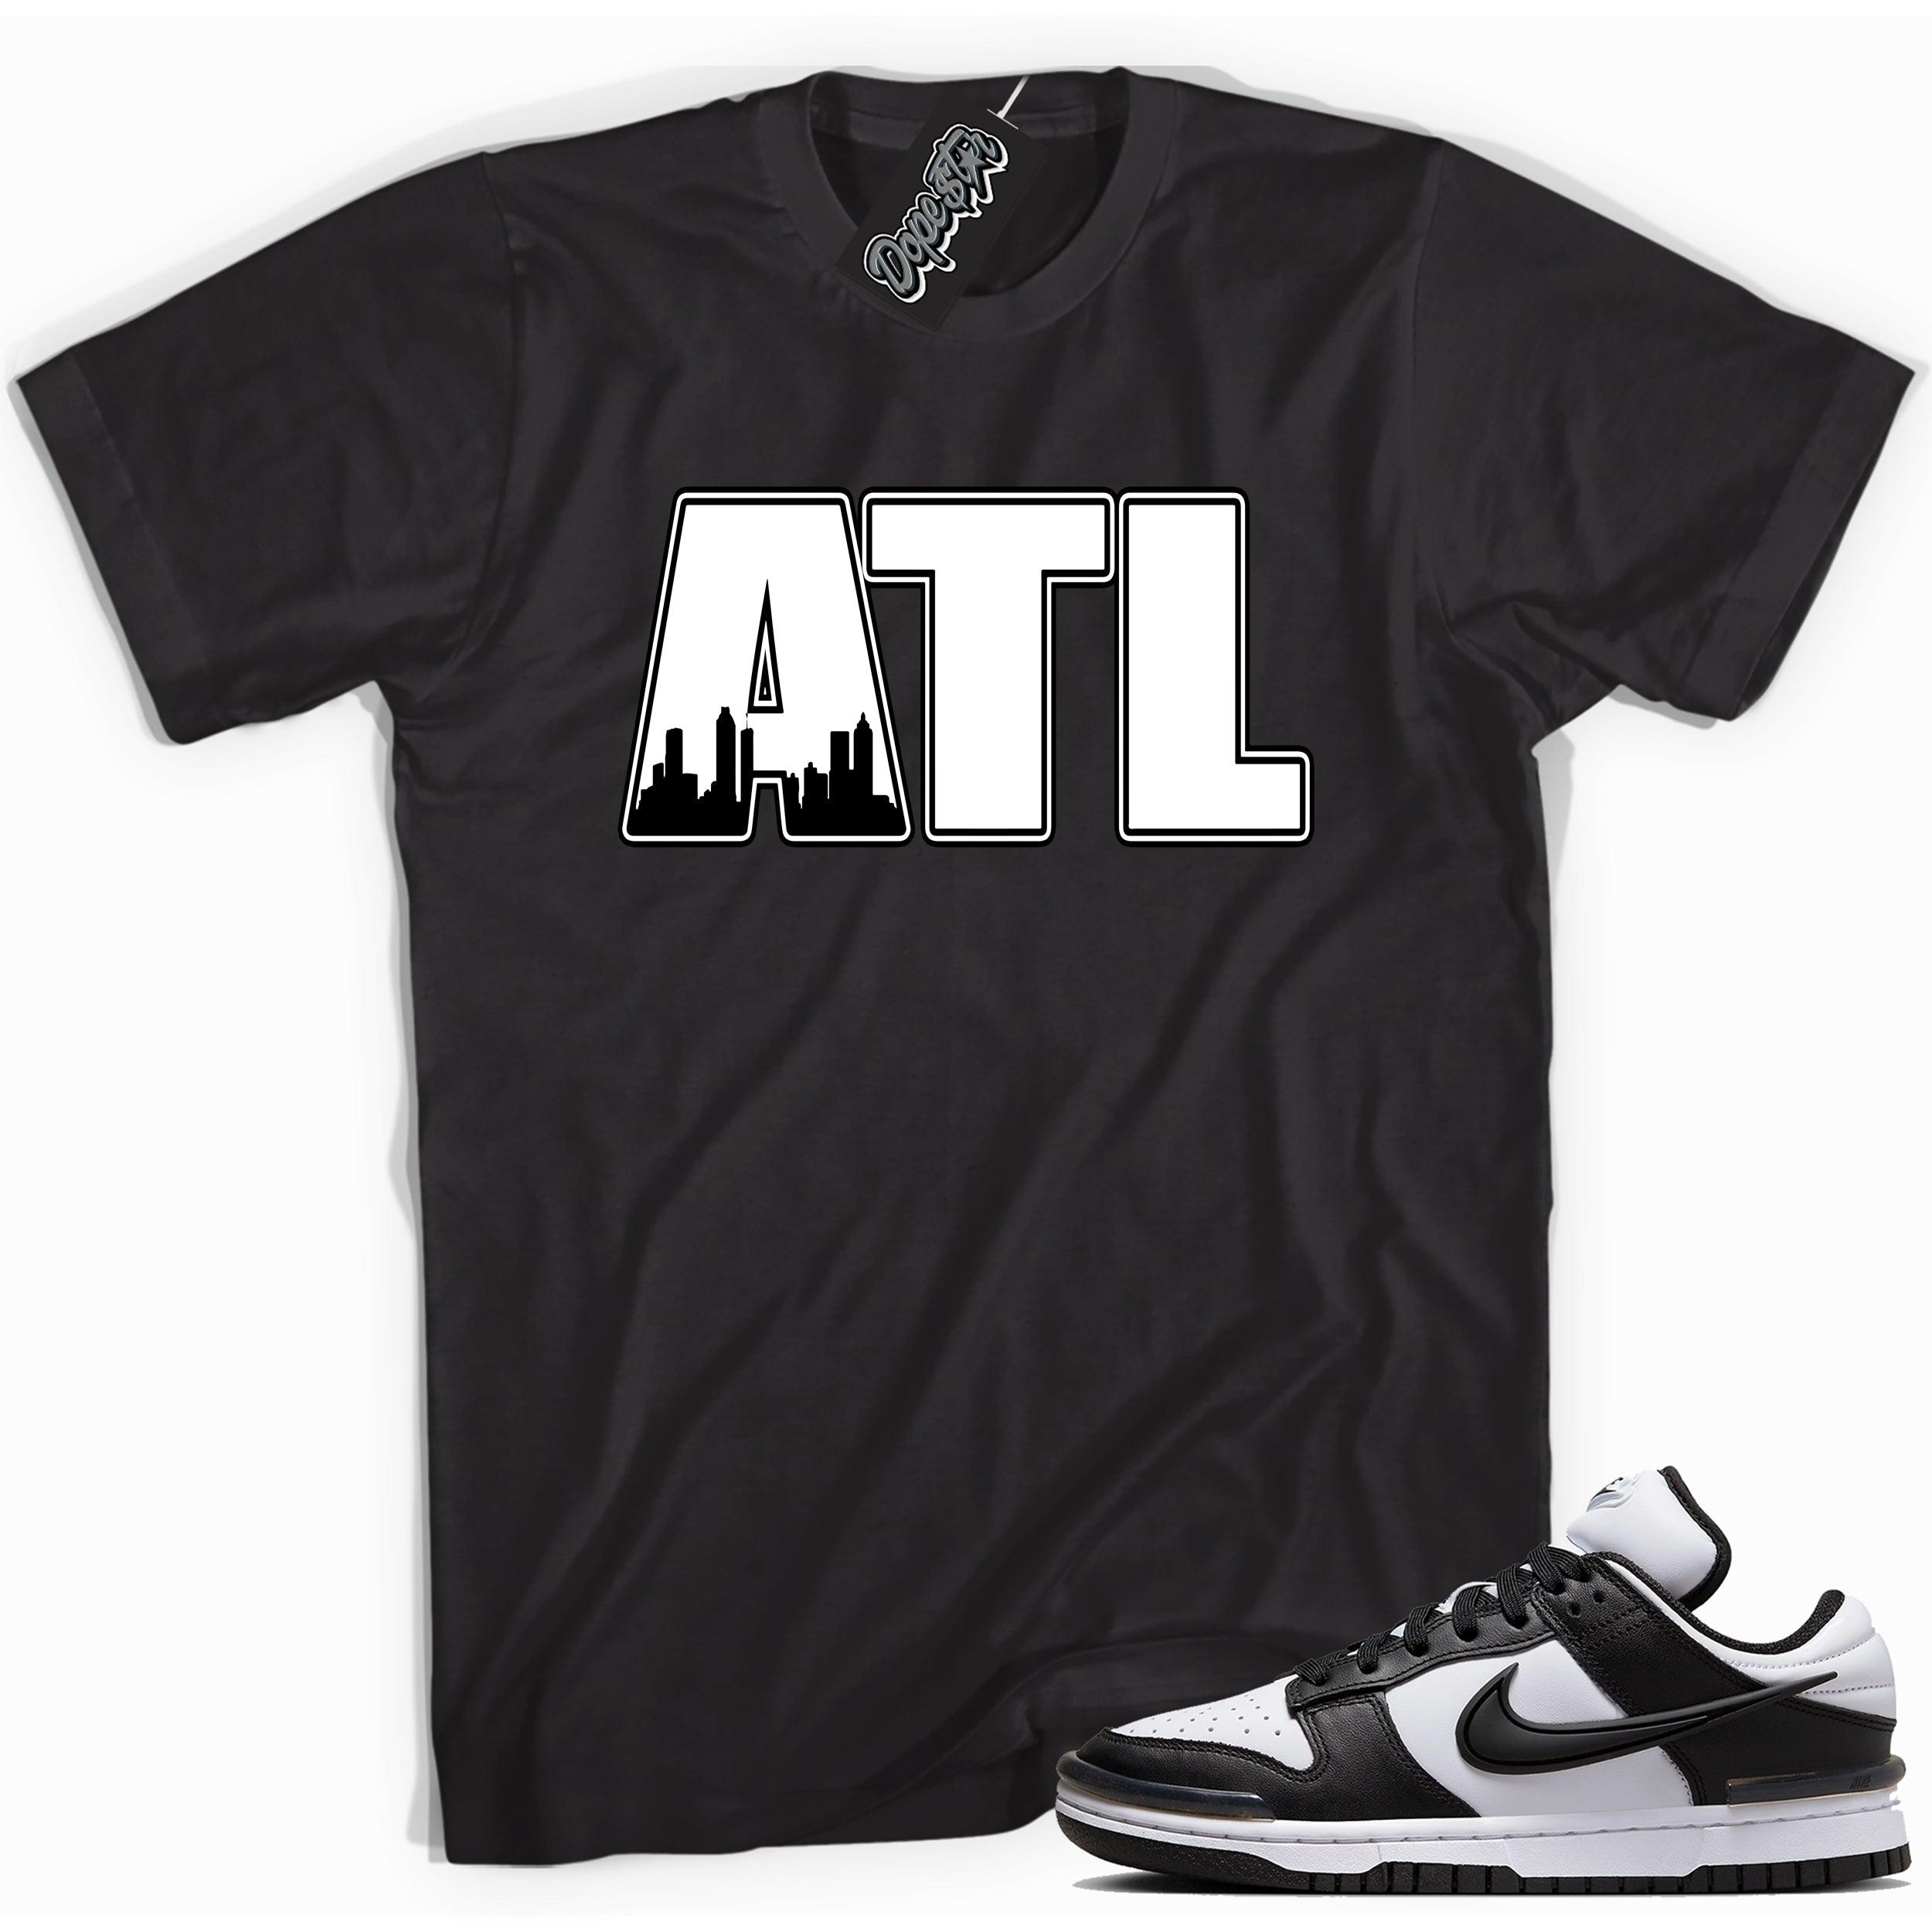 Cool black graphic tee with 'atl' print, that perfectly matches Nike Dunk Low Twist Panda sneakers.